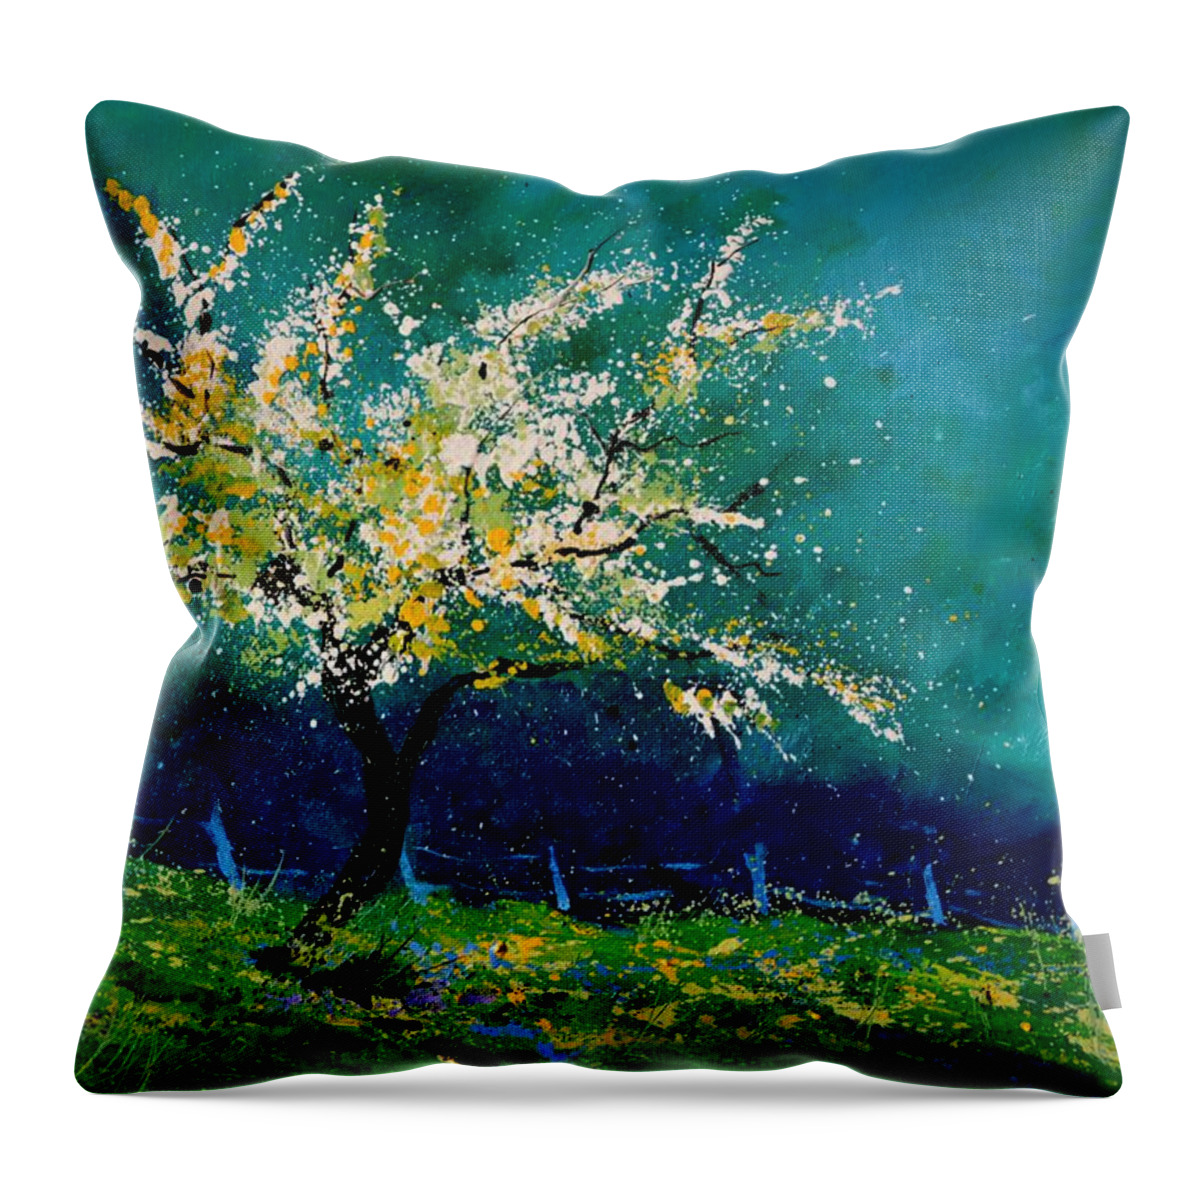 Landscape Throw Pillow featuring the painting Appletree In Blossom by Pol Ledent